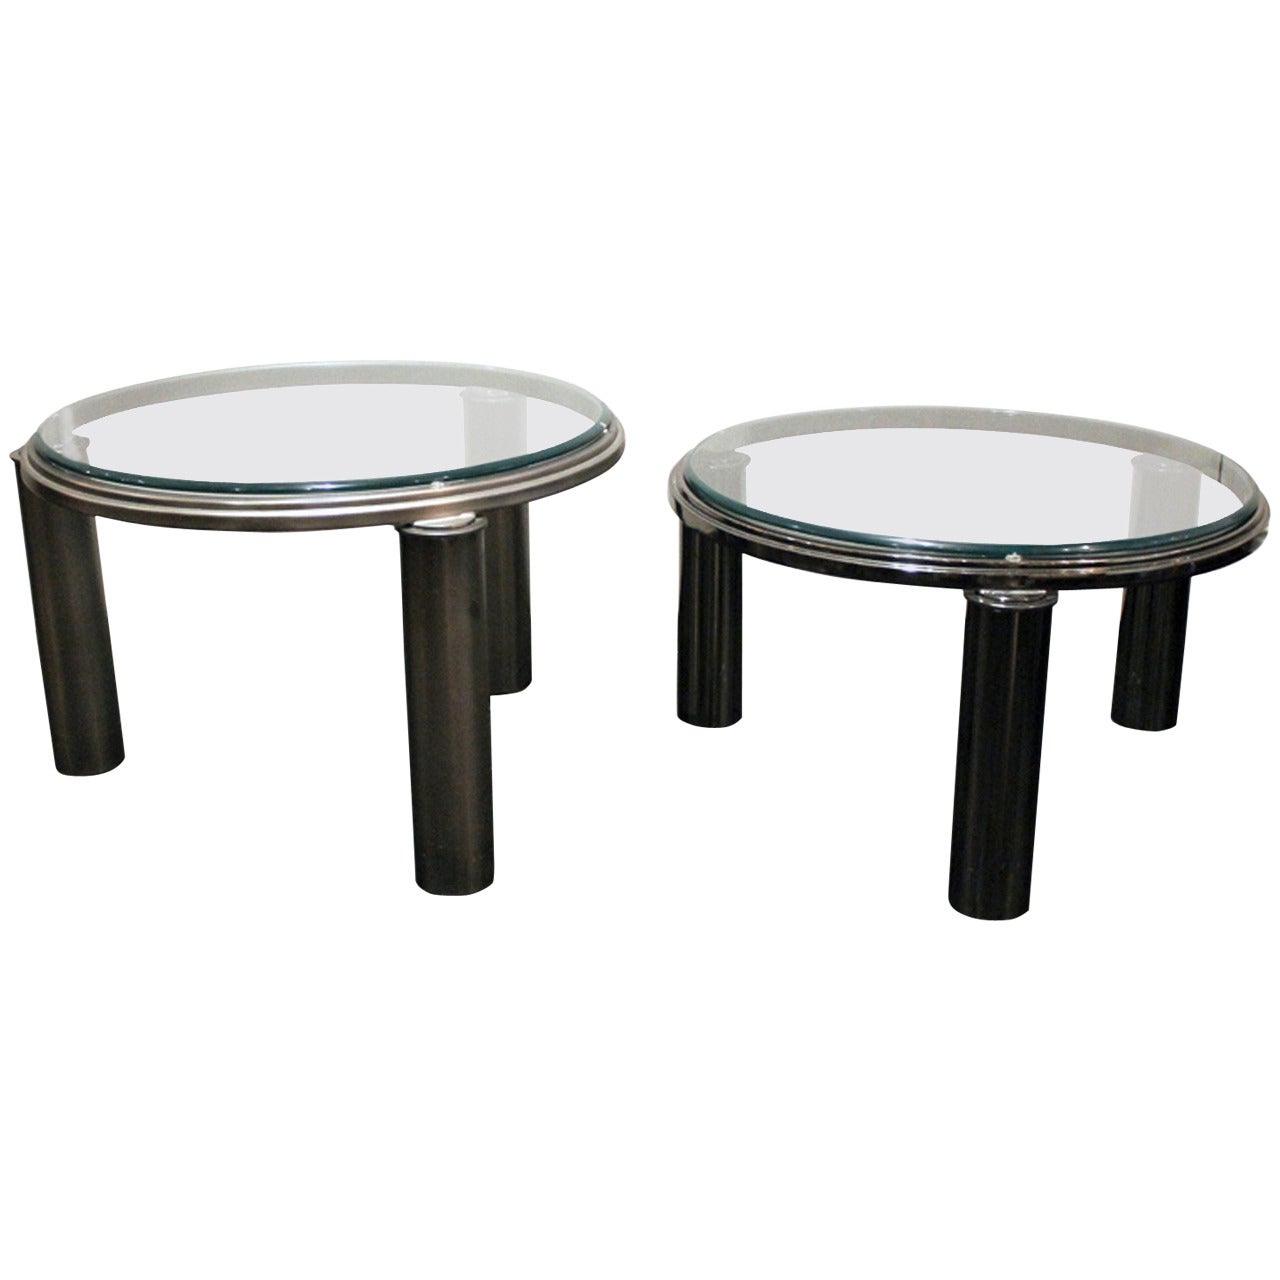 Matched Set of 20th Century Circular Nesting Tables